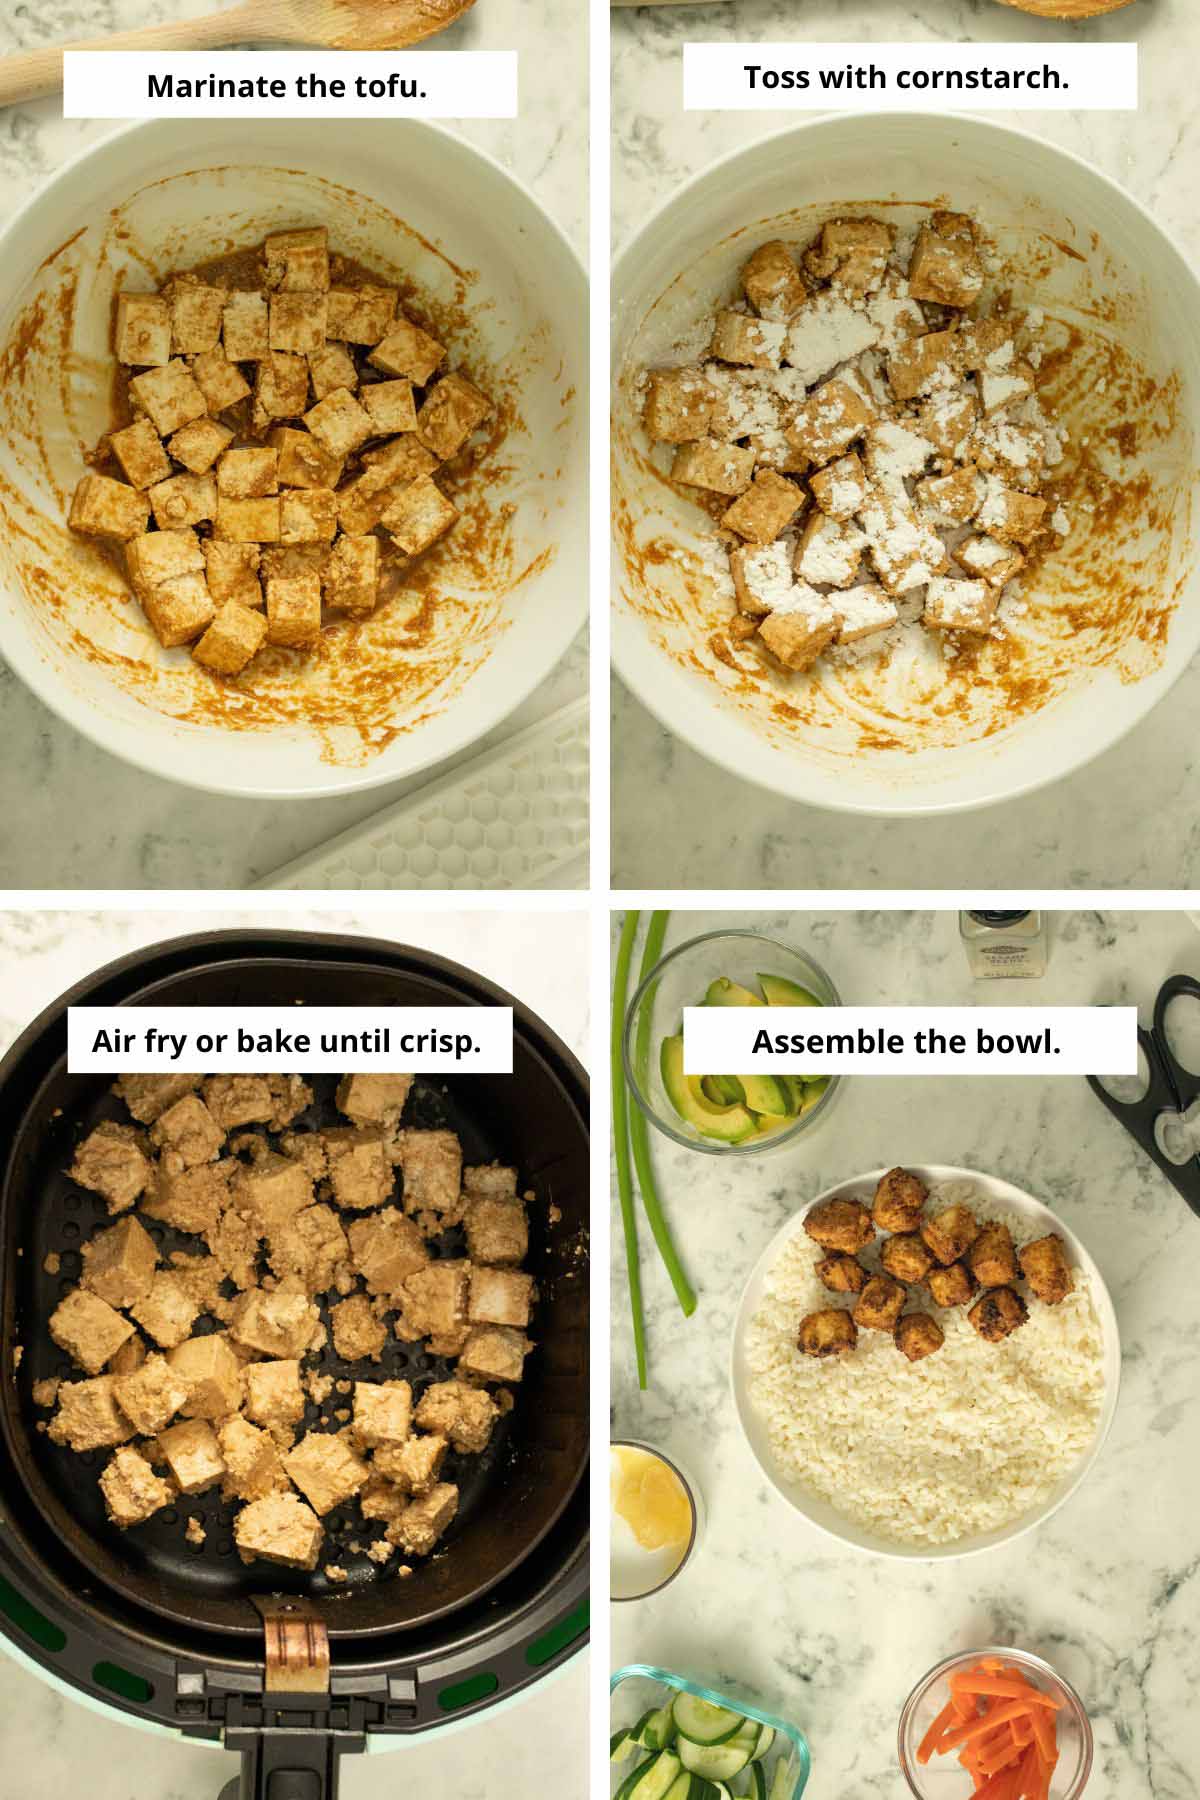 image collage showing tofu marinating, with cornstarch, in the air fryer, and piled onto the sushi bowl